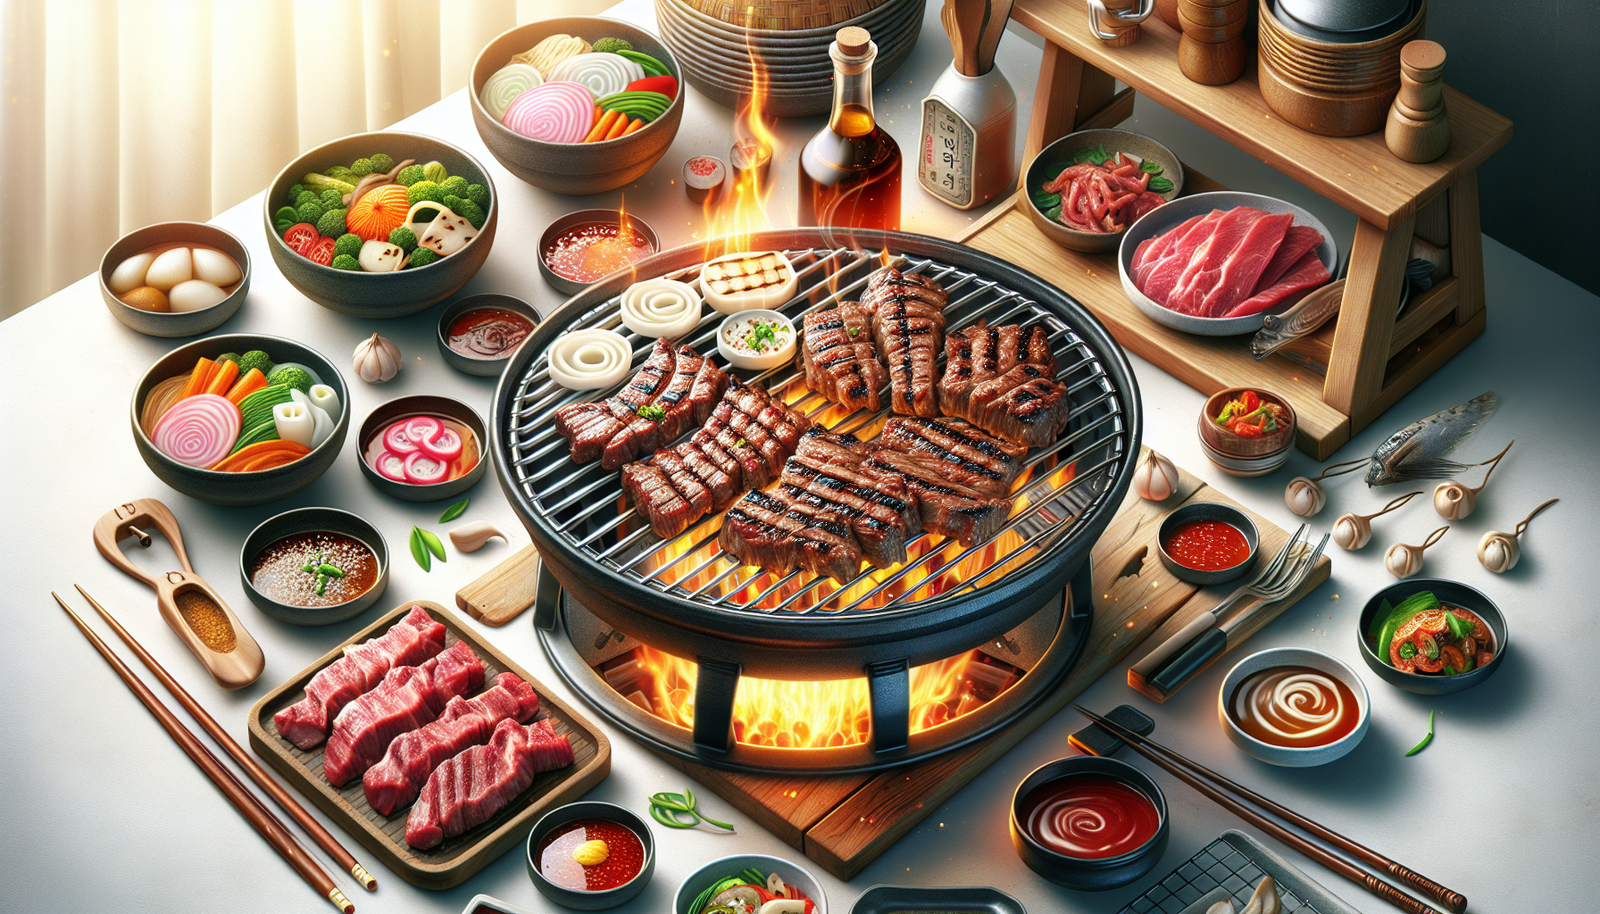 How Do You Properly Prepare And Serve Korean Barbecue At Home?